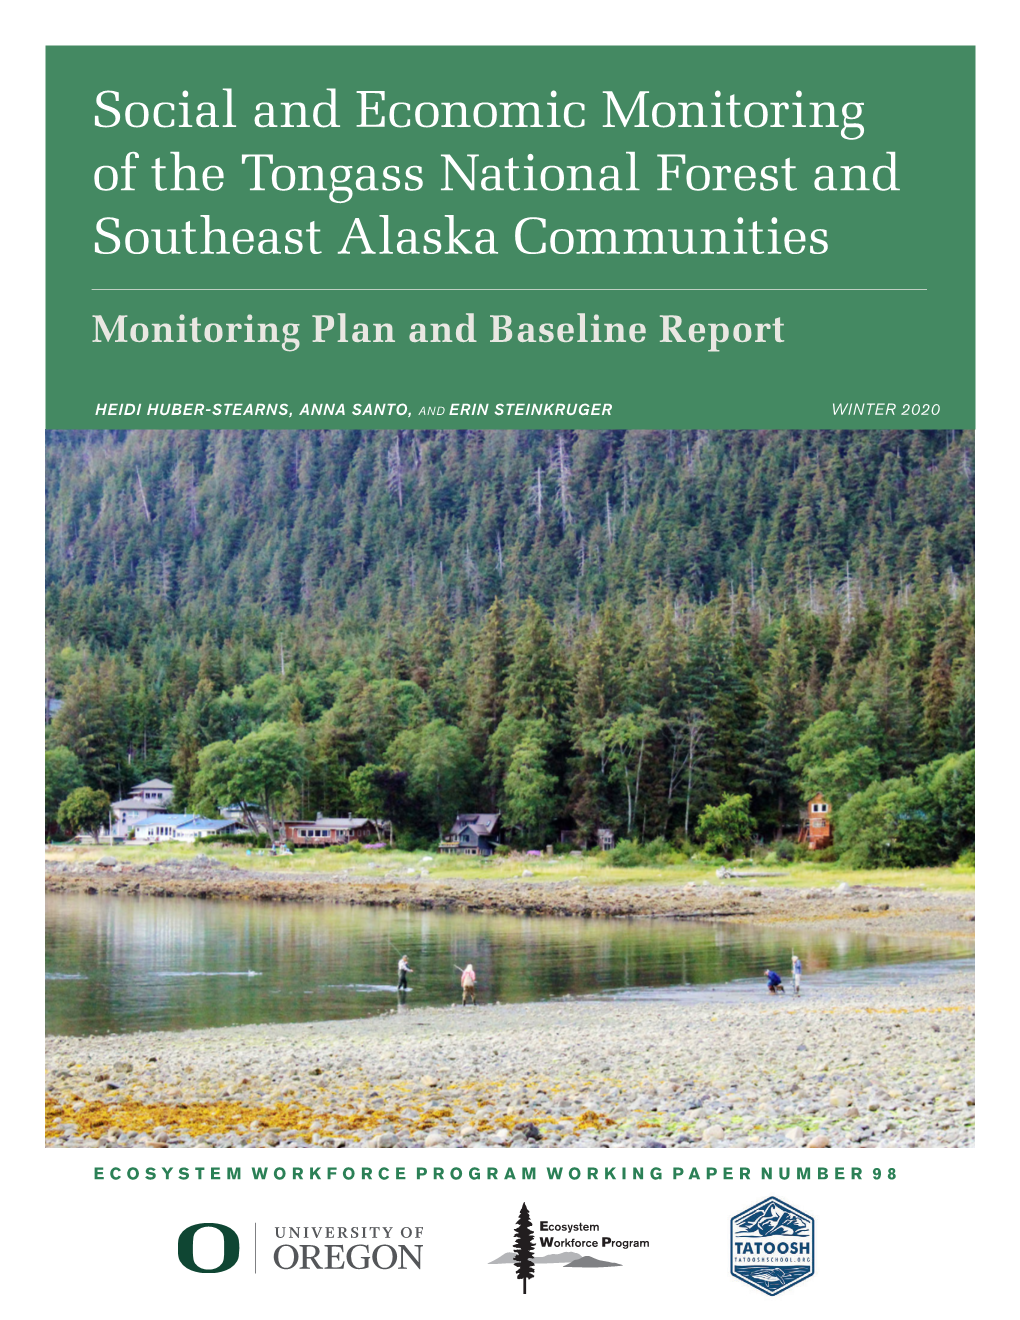 Social and Economic Monitoring of the Tongass National Forest and Southeast Alaska Communities